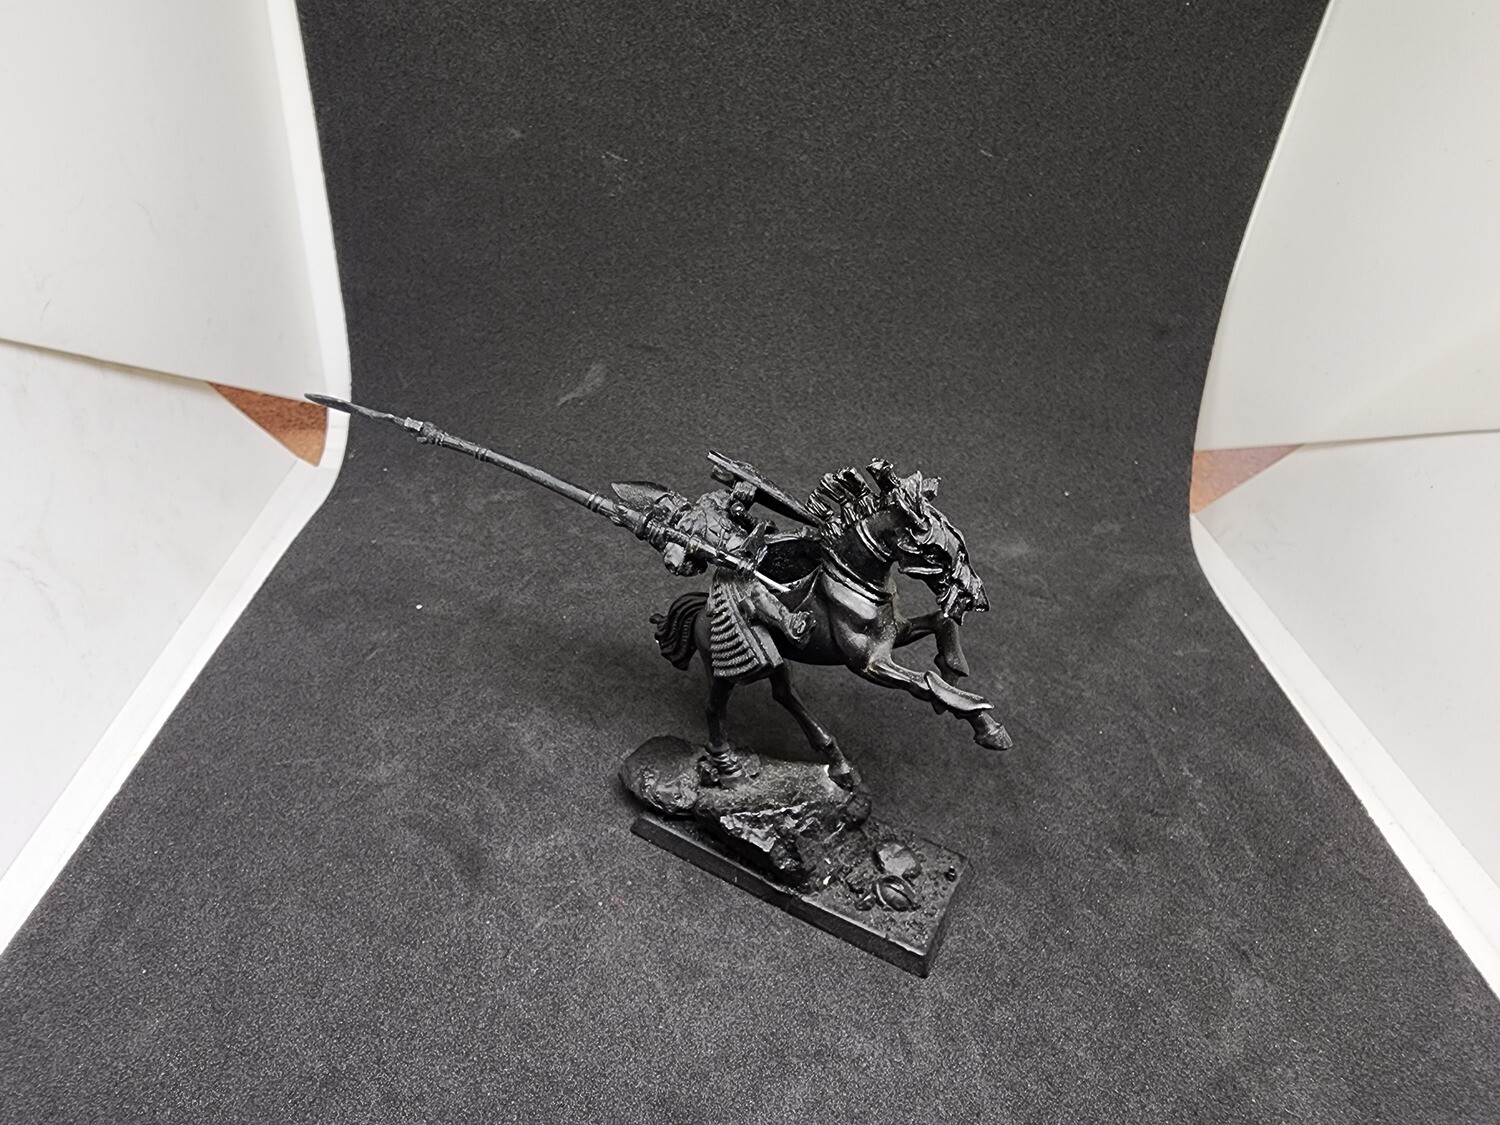 Used Warhammer Mounted Model #4 (AoS/Old World)